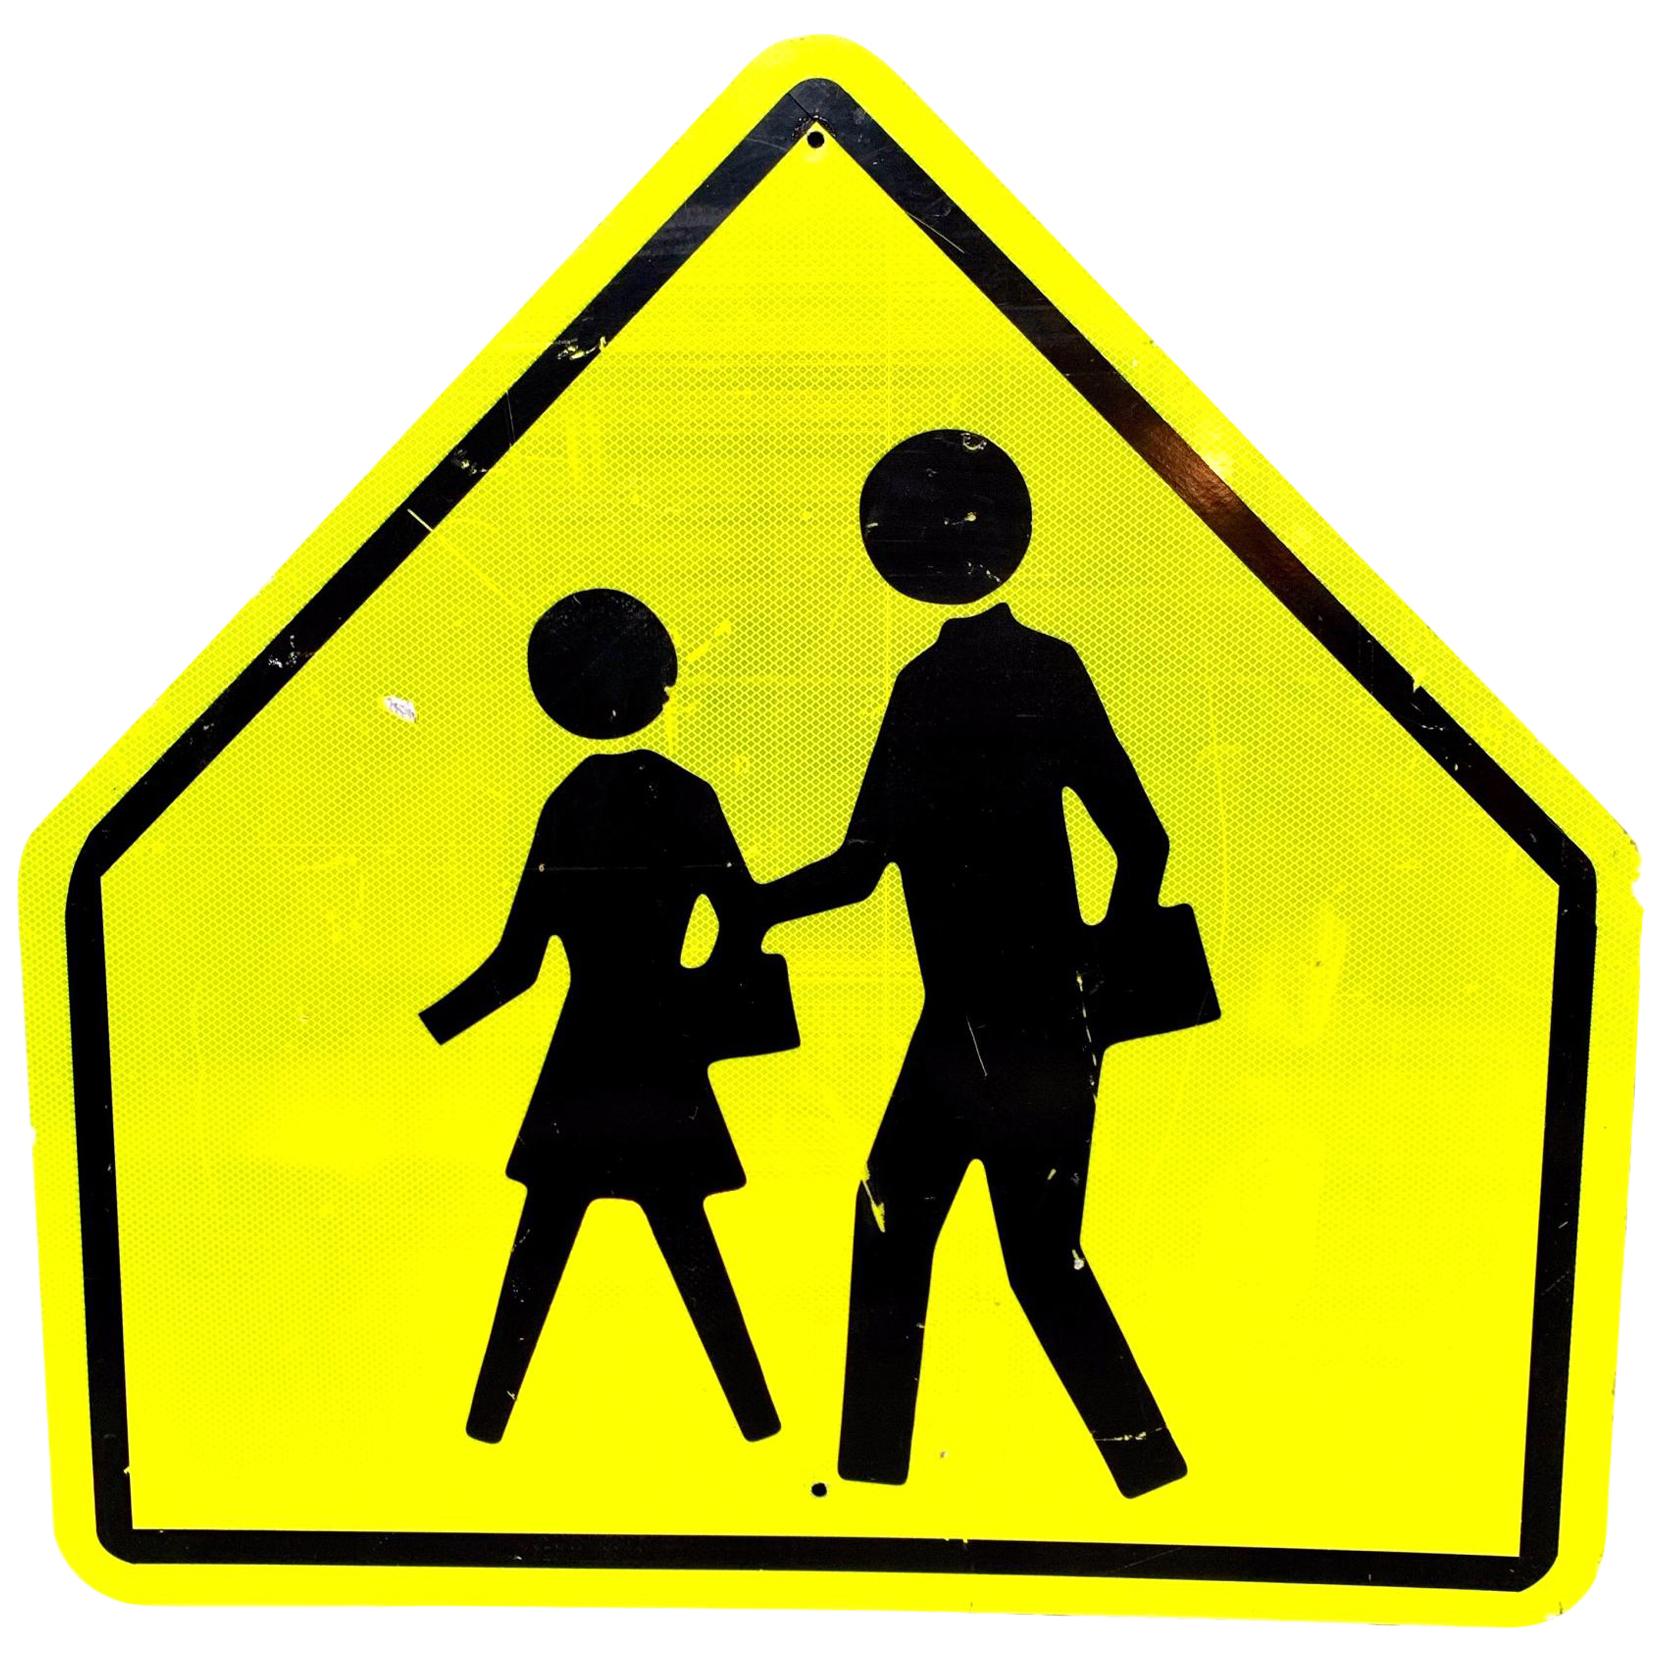 Massive Acid Yellow Reflective Pedestrian Road Sign from Los Angeles